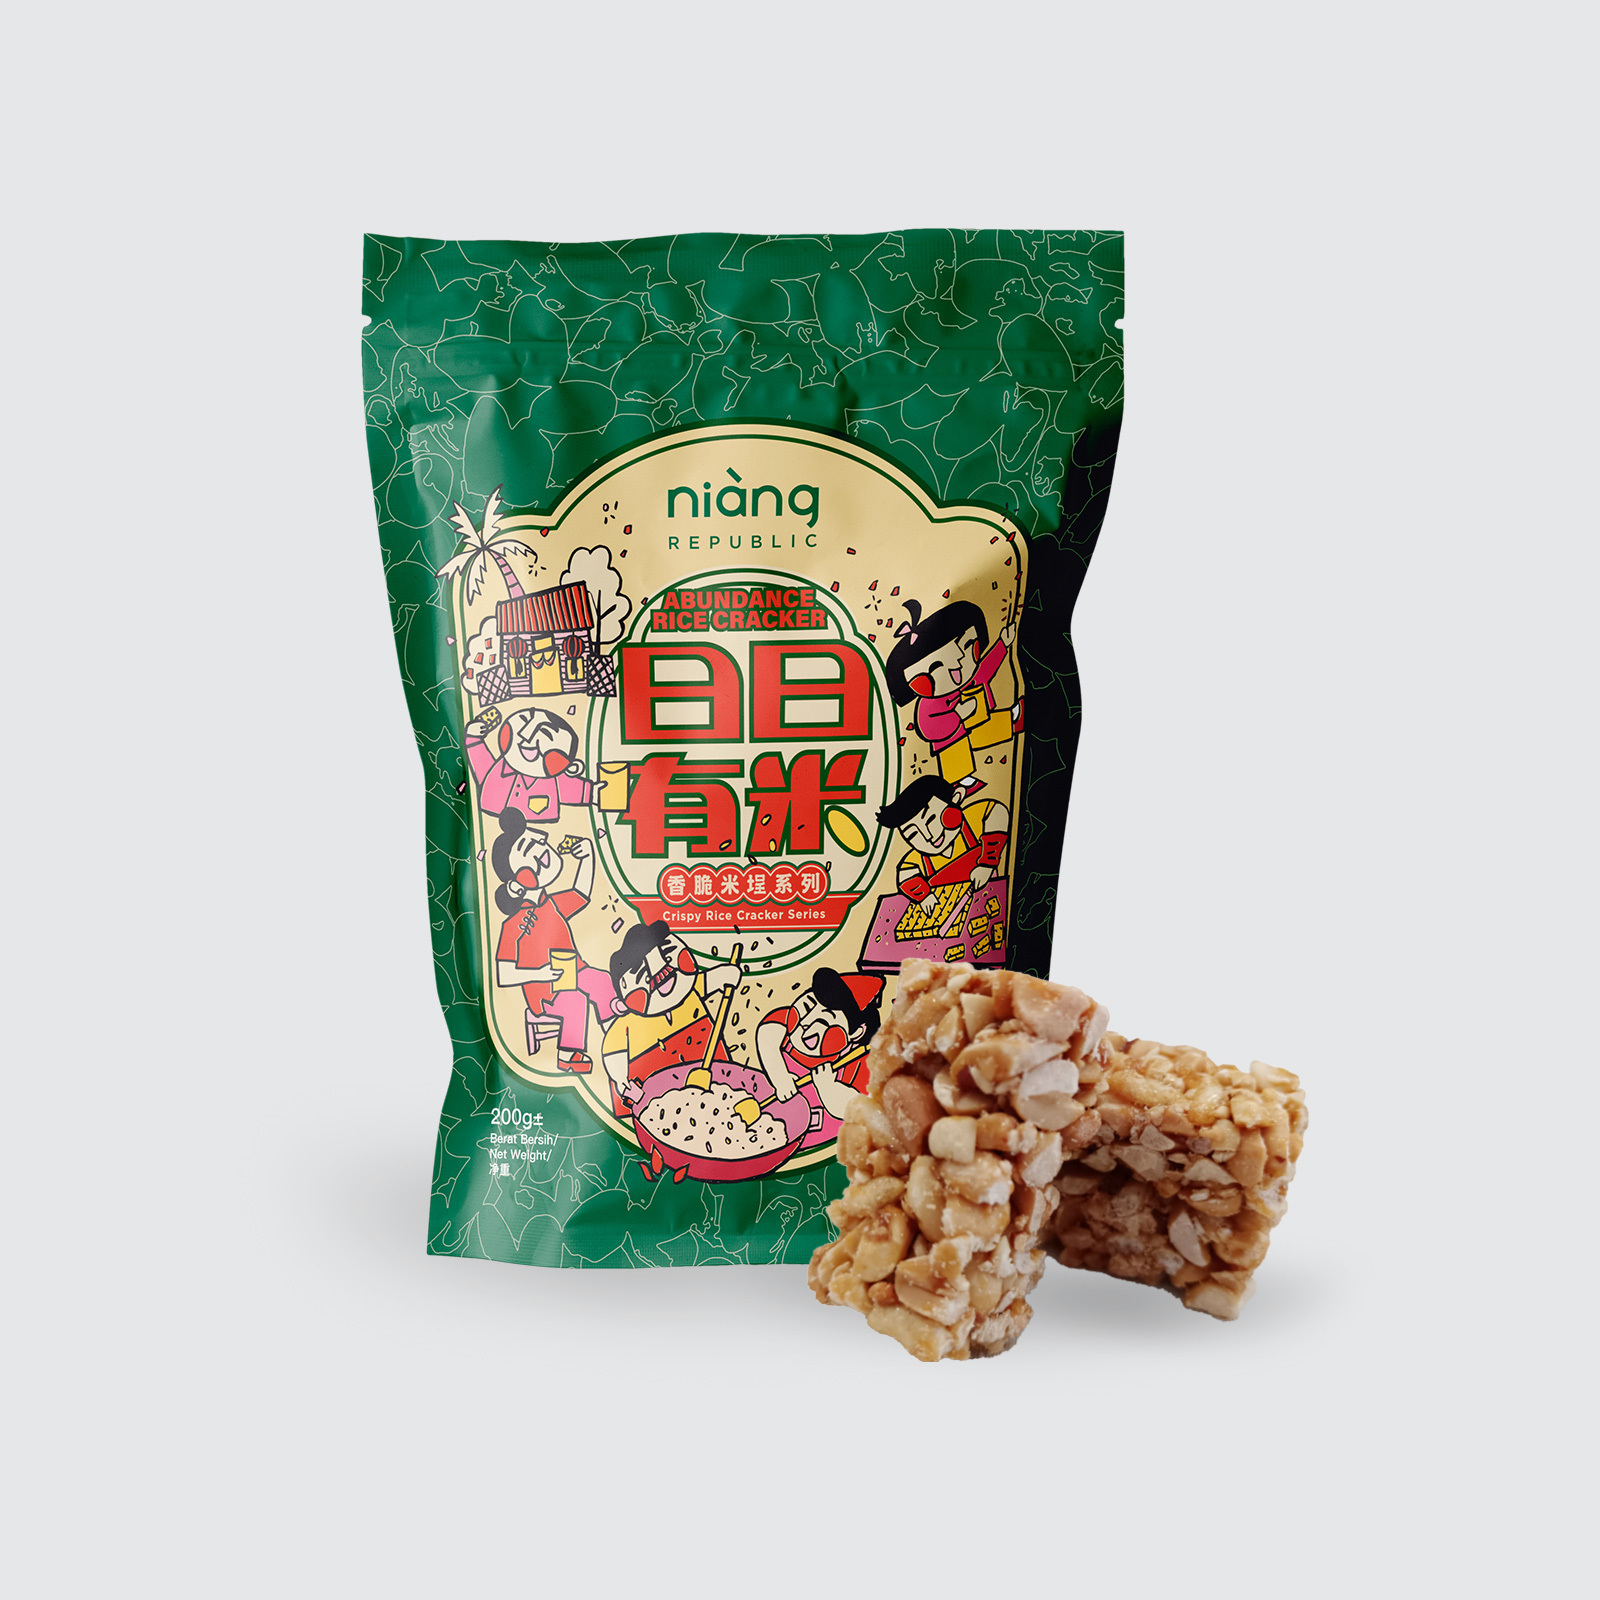 rice-cracker-2product-categories